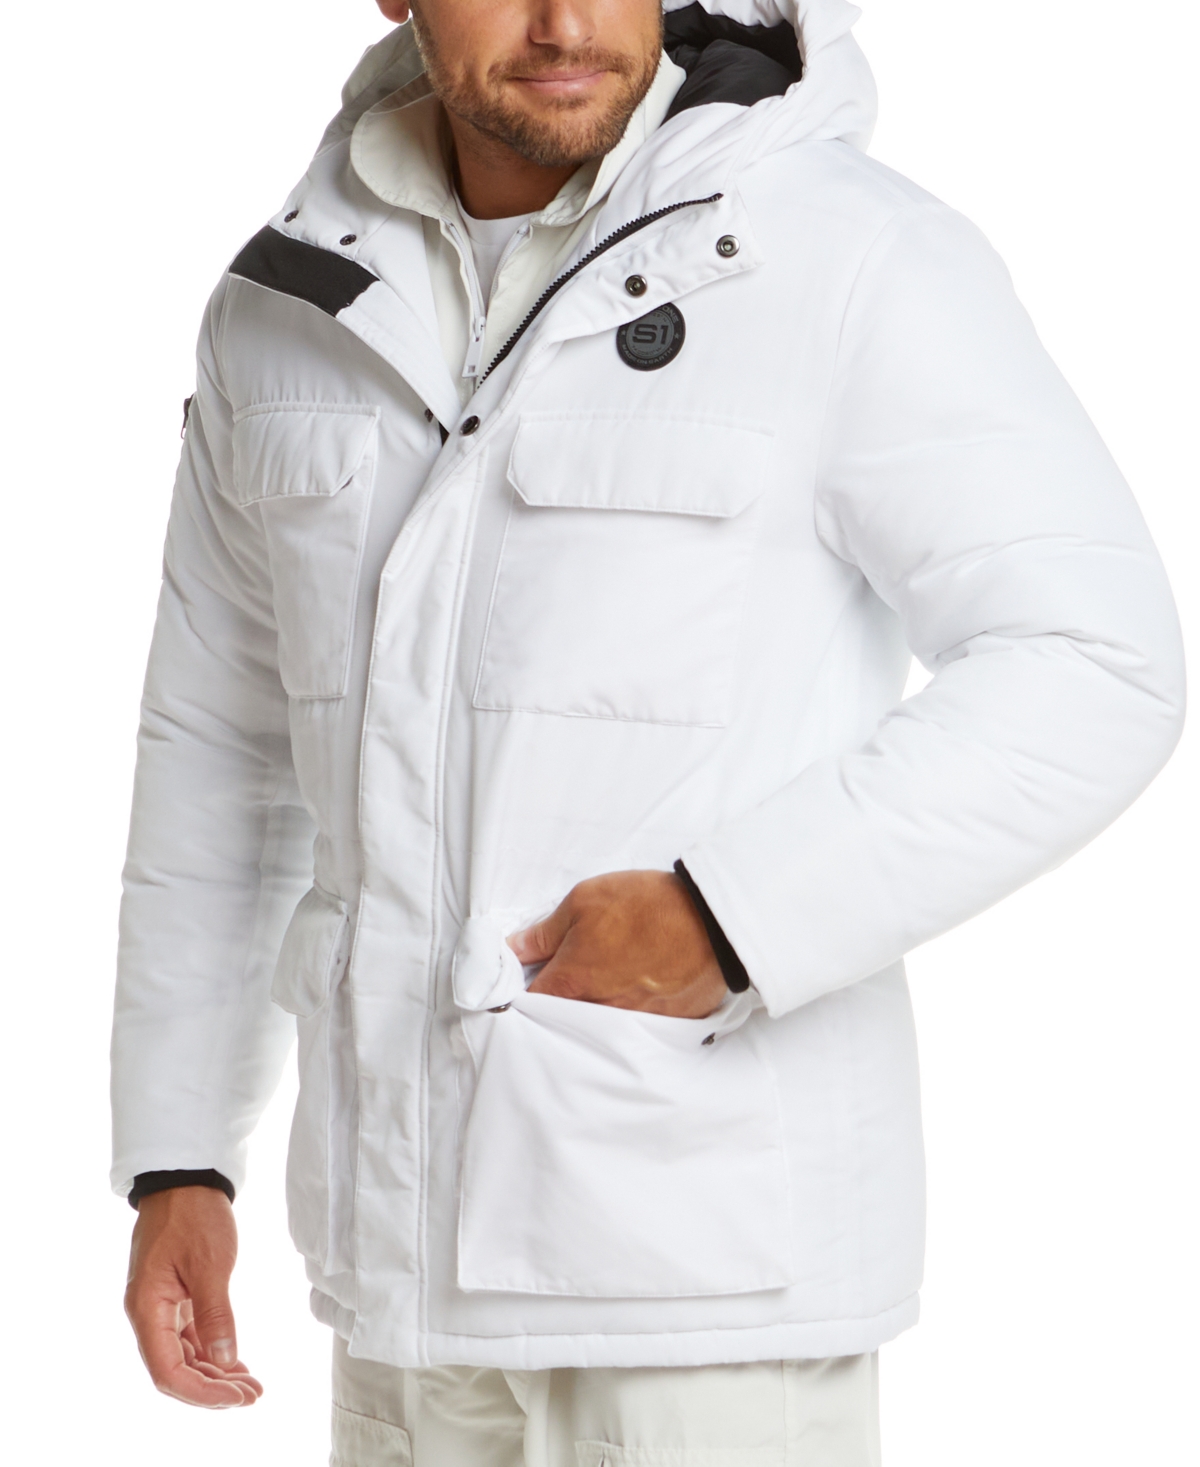 Space One Men's Nasa Inspired Parka Jacket With Printed Astronaut Interior In White